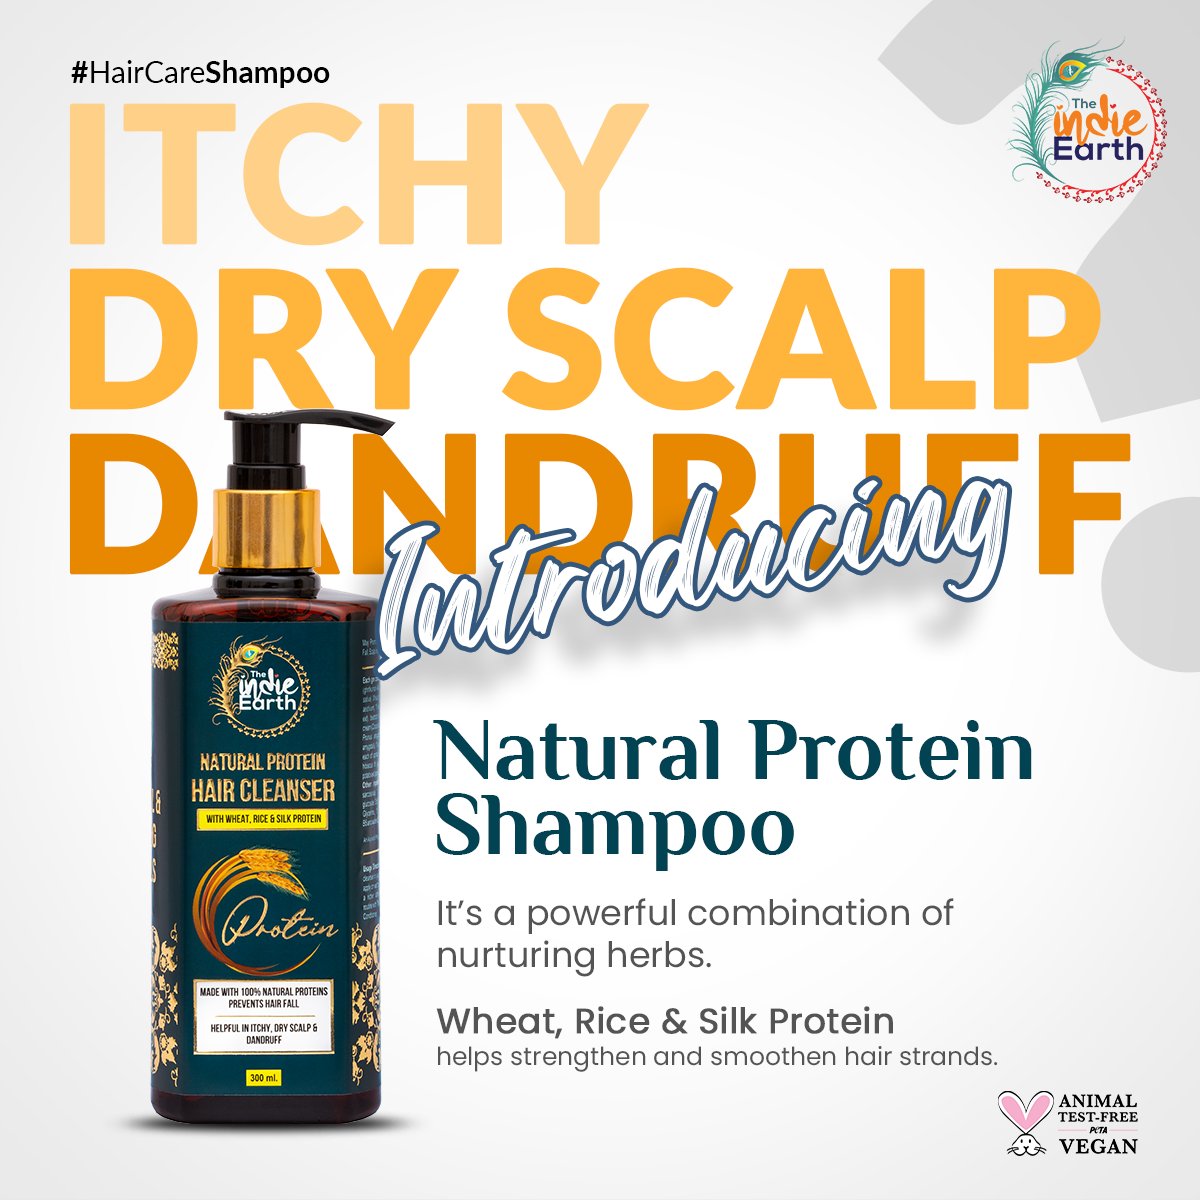 😍 Shop Now: bit.ly/3N1YEk6

🎯 #TheIndieEarth Natural Protein Hair Cleanser is a powerful combination of 🌿 nurturing herbs that add up to the immunity of hair while making them strong, thick, and beautiful looking.

#hairprotein #hairshampoo #proteinshampoo